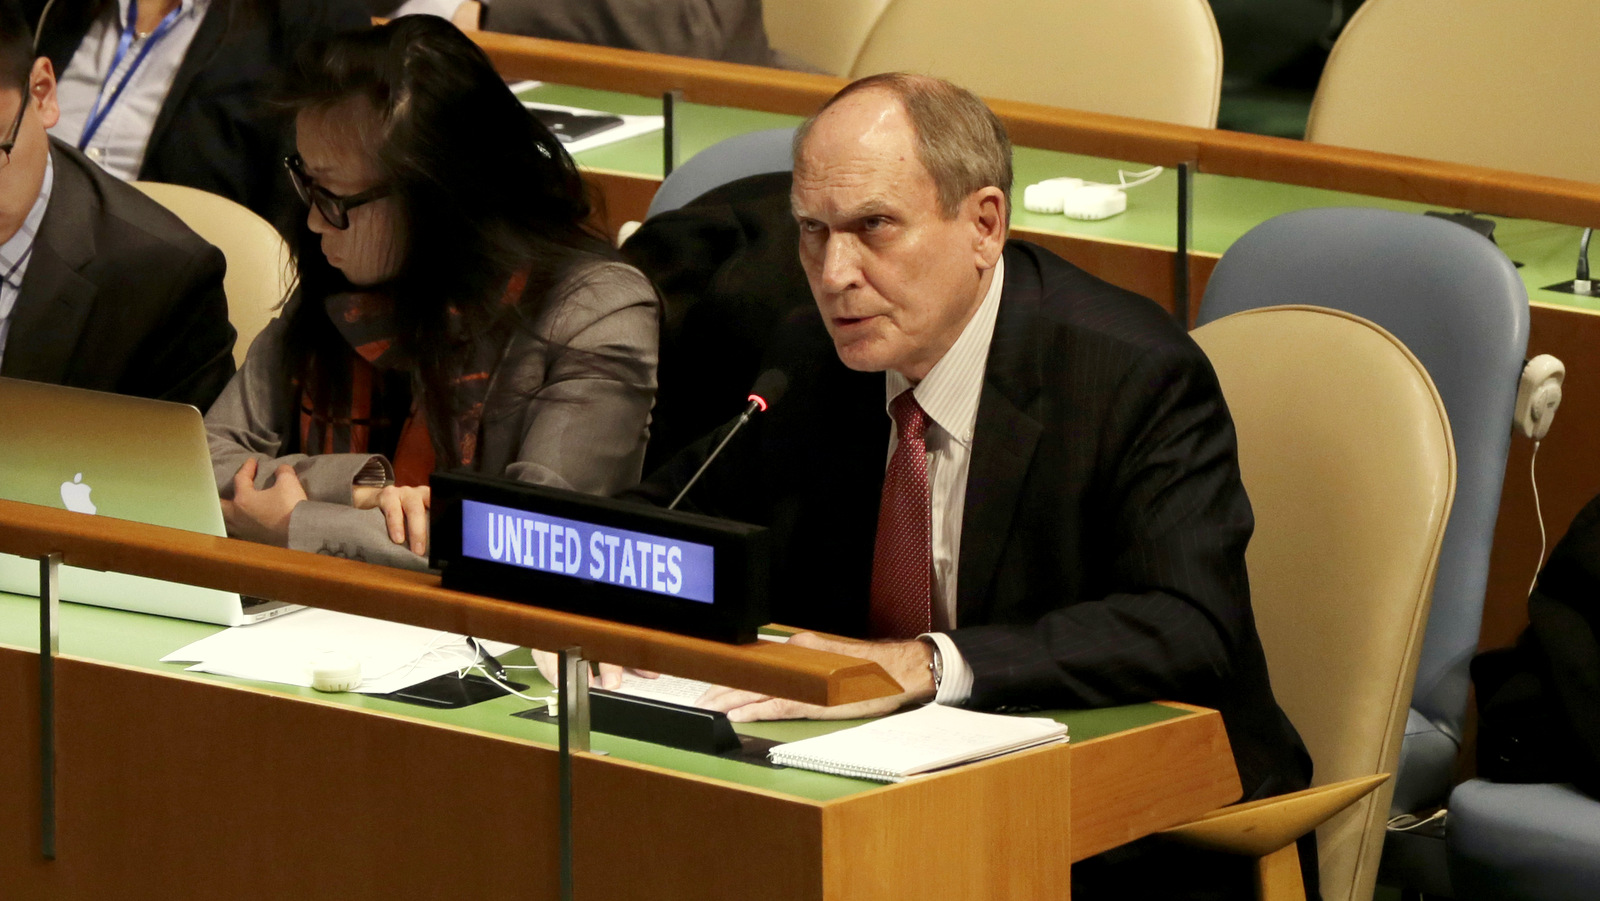 U.S. Ambassador Ronald Godard addresses the United Nations General Assembly before a vote, Tuesday, Oct. 27, 2015. Cuba will submit to the UN General Assembly on Tuesday its annual draft resolution calling for an end to the U.S.-led five-decade embargo against the Caribbean nation.  (AP Photo/Richard Drew)